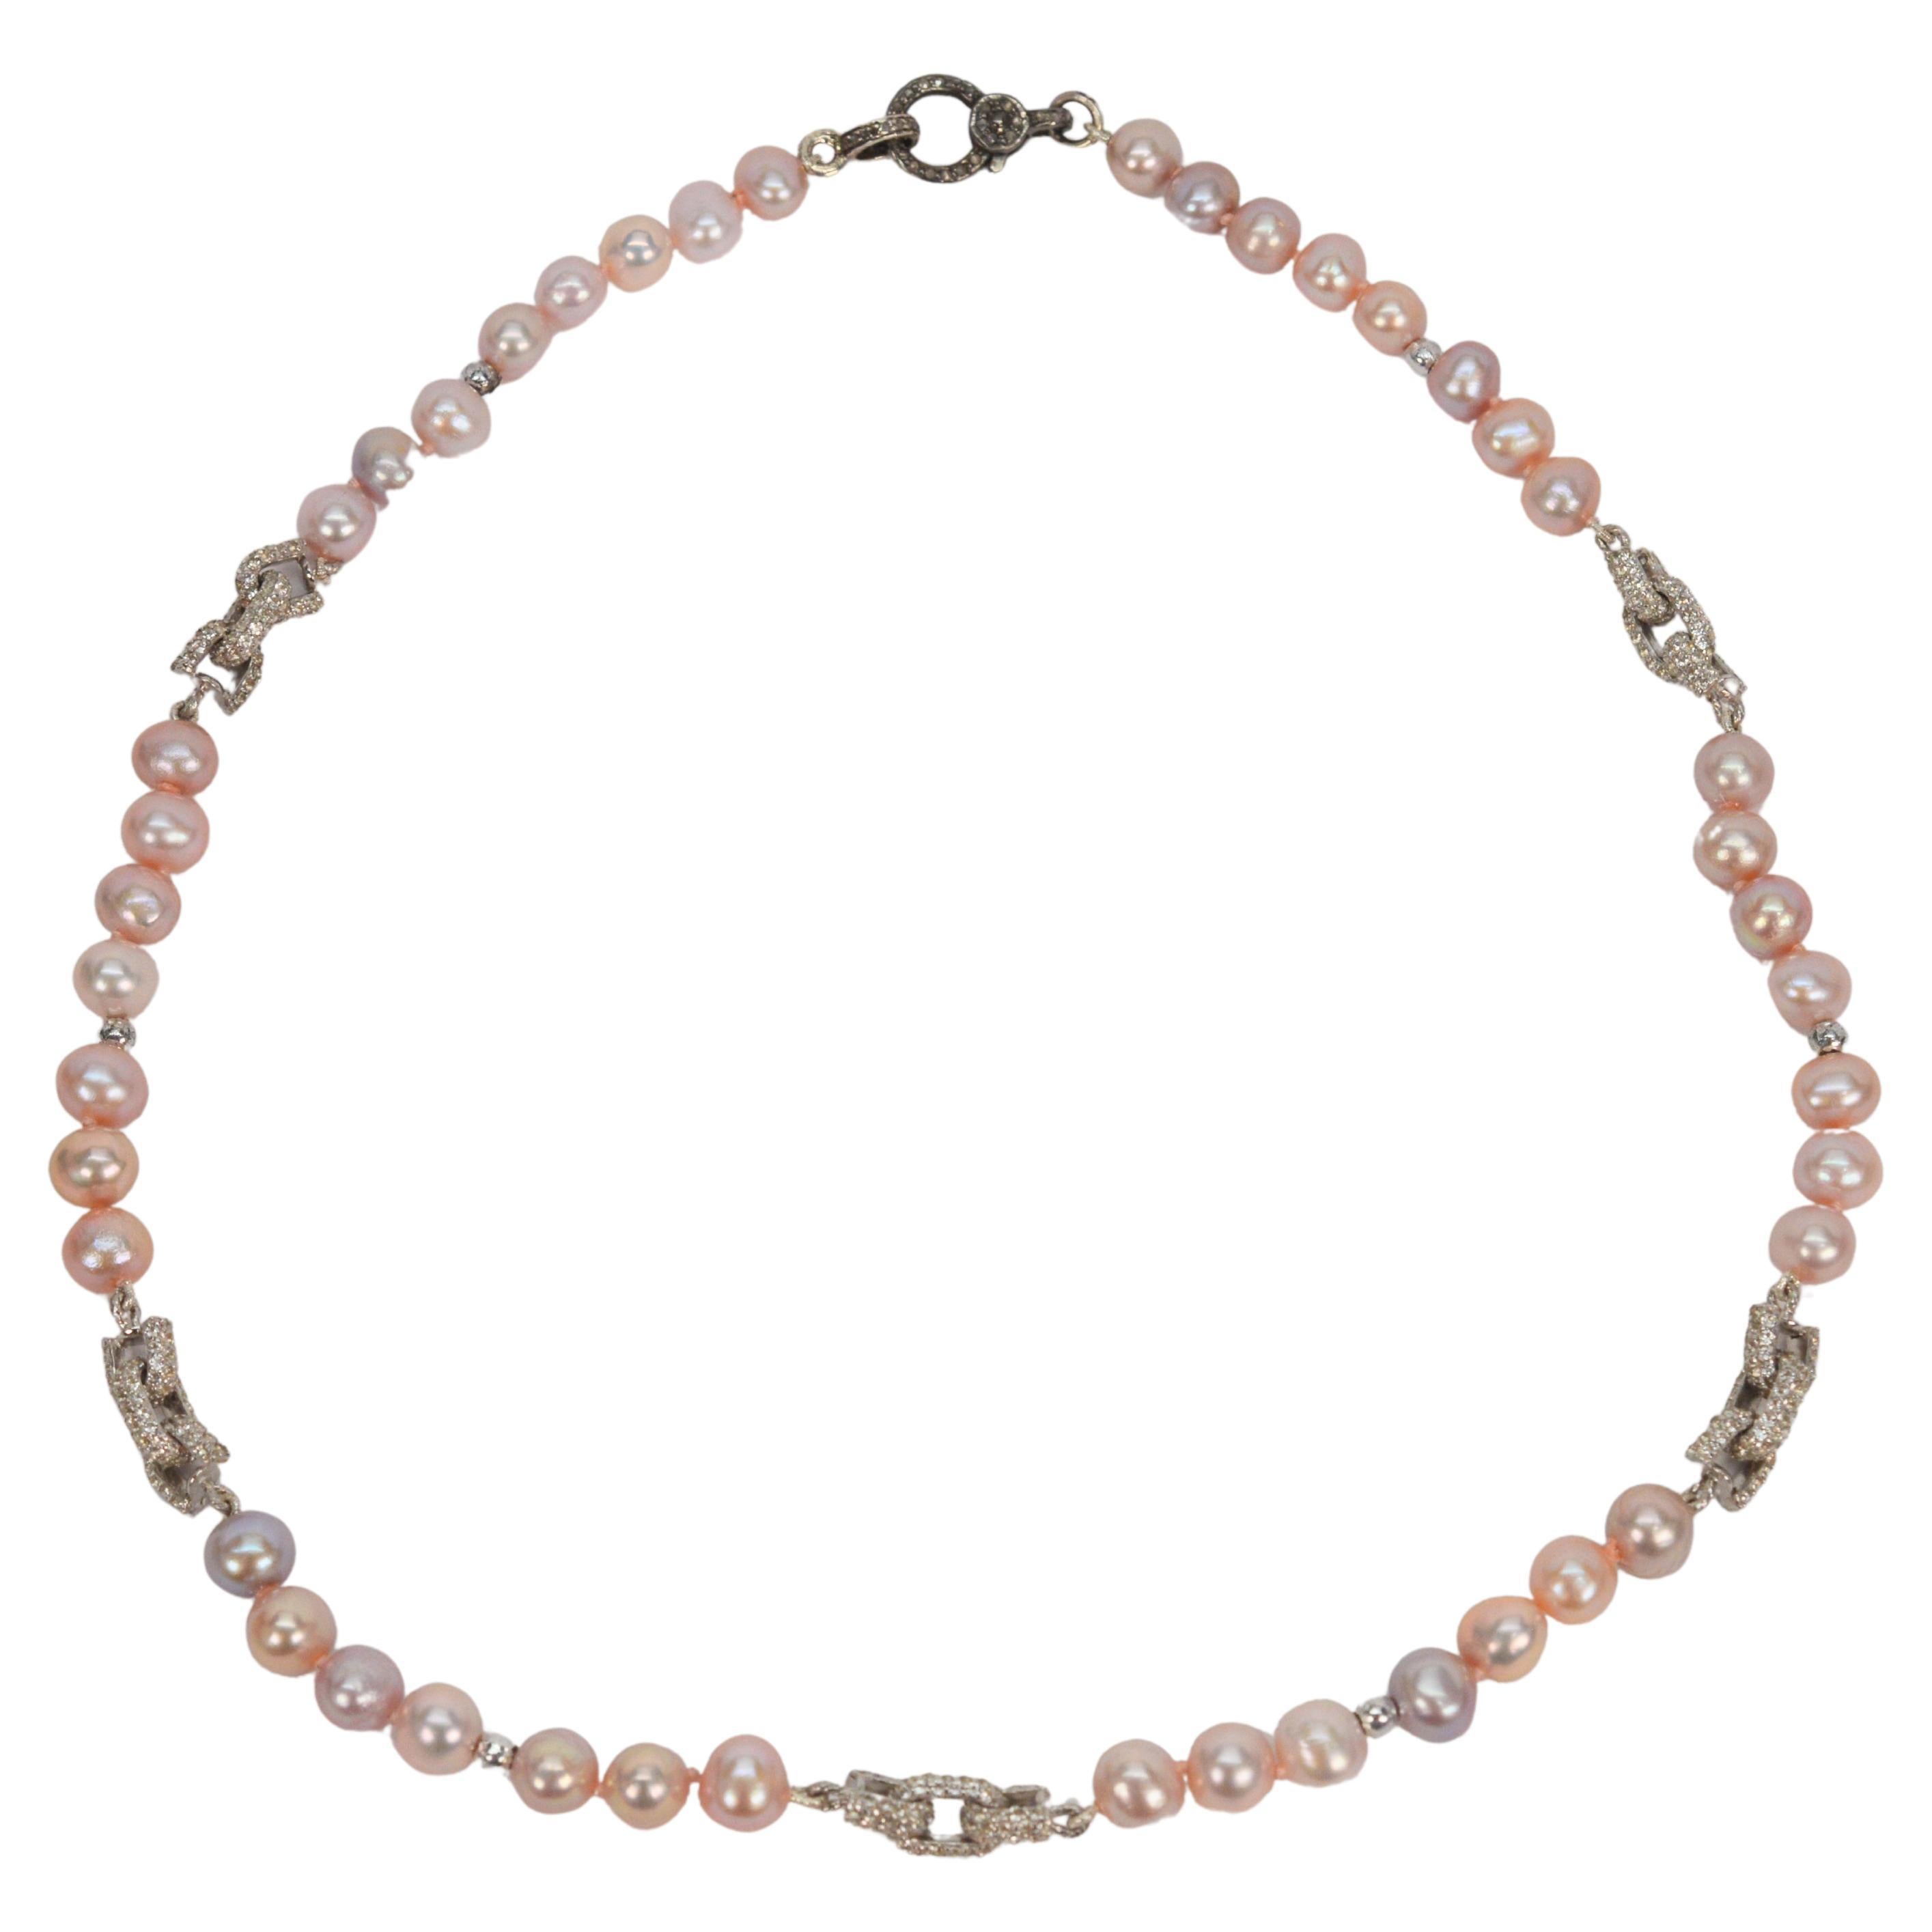 Ultra-feminine with a mix of soft warm blush hues, hand-strung 6.5mm akoya pearls are enhanced by five fabulous white sapphire sterling bow-tie inspired link stations that sparkle along this 16 inch strand. 
Artisan made, one-of-a-kind, fitted with